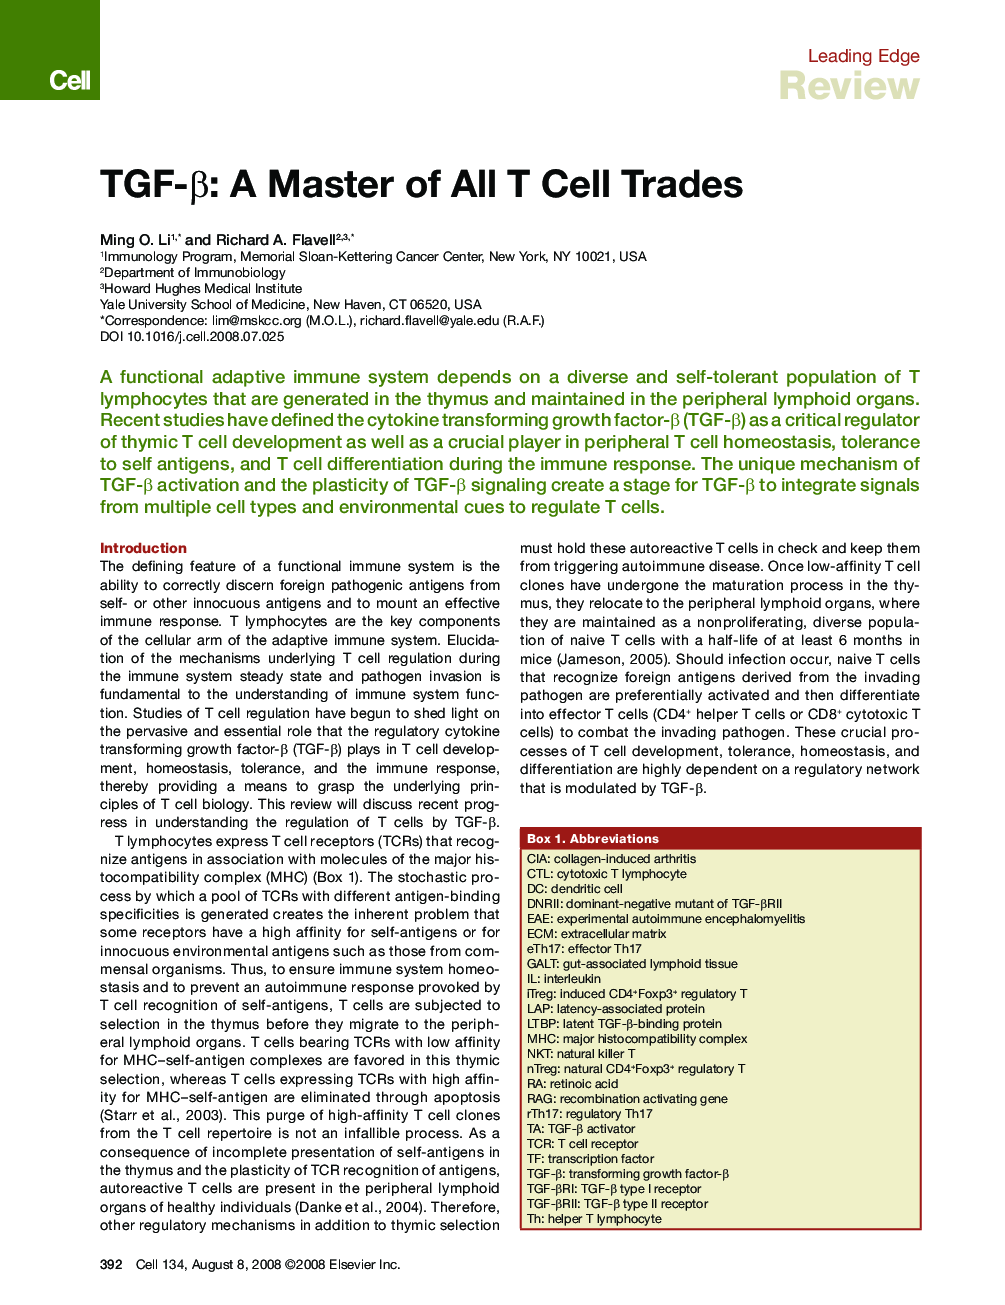 TGF-β: A Master of All T Cell Trades